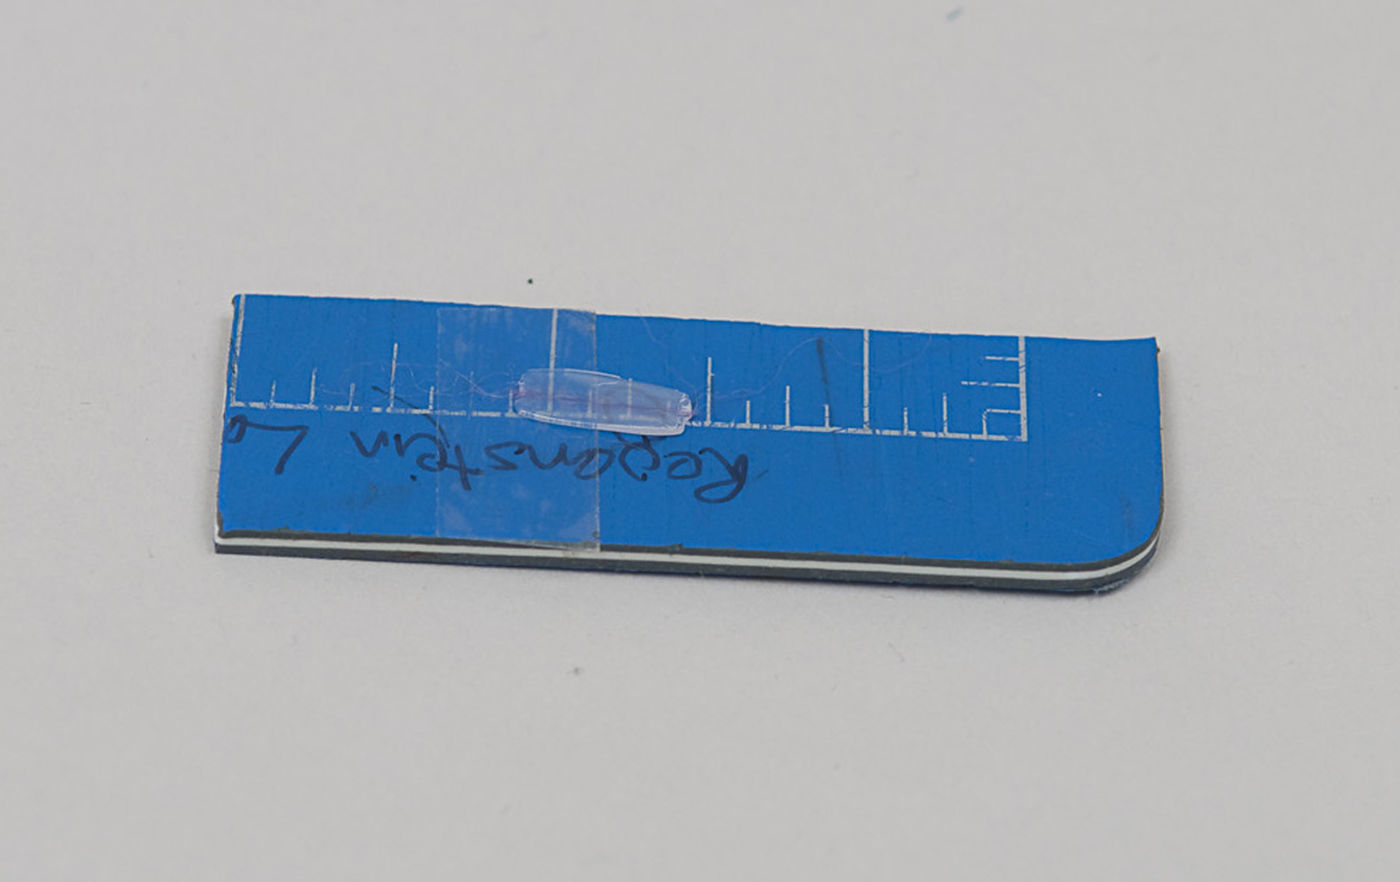 Polythene with embedded fiber, mounted on double-sided tape on a piece of self-healing cutting mat.